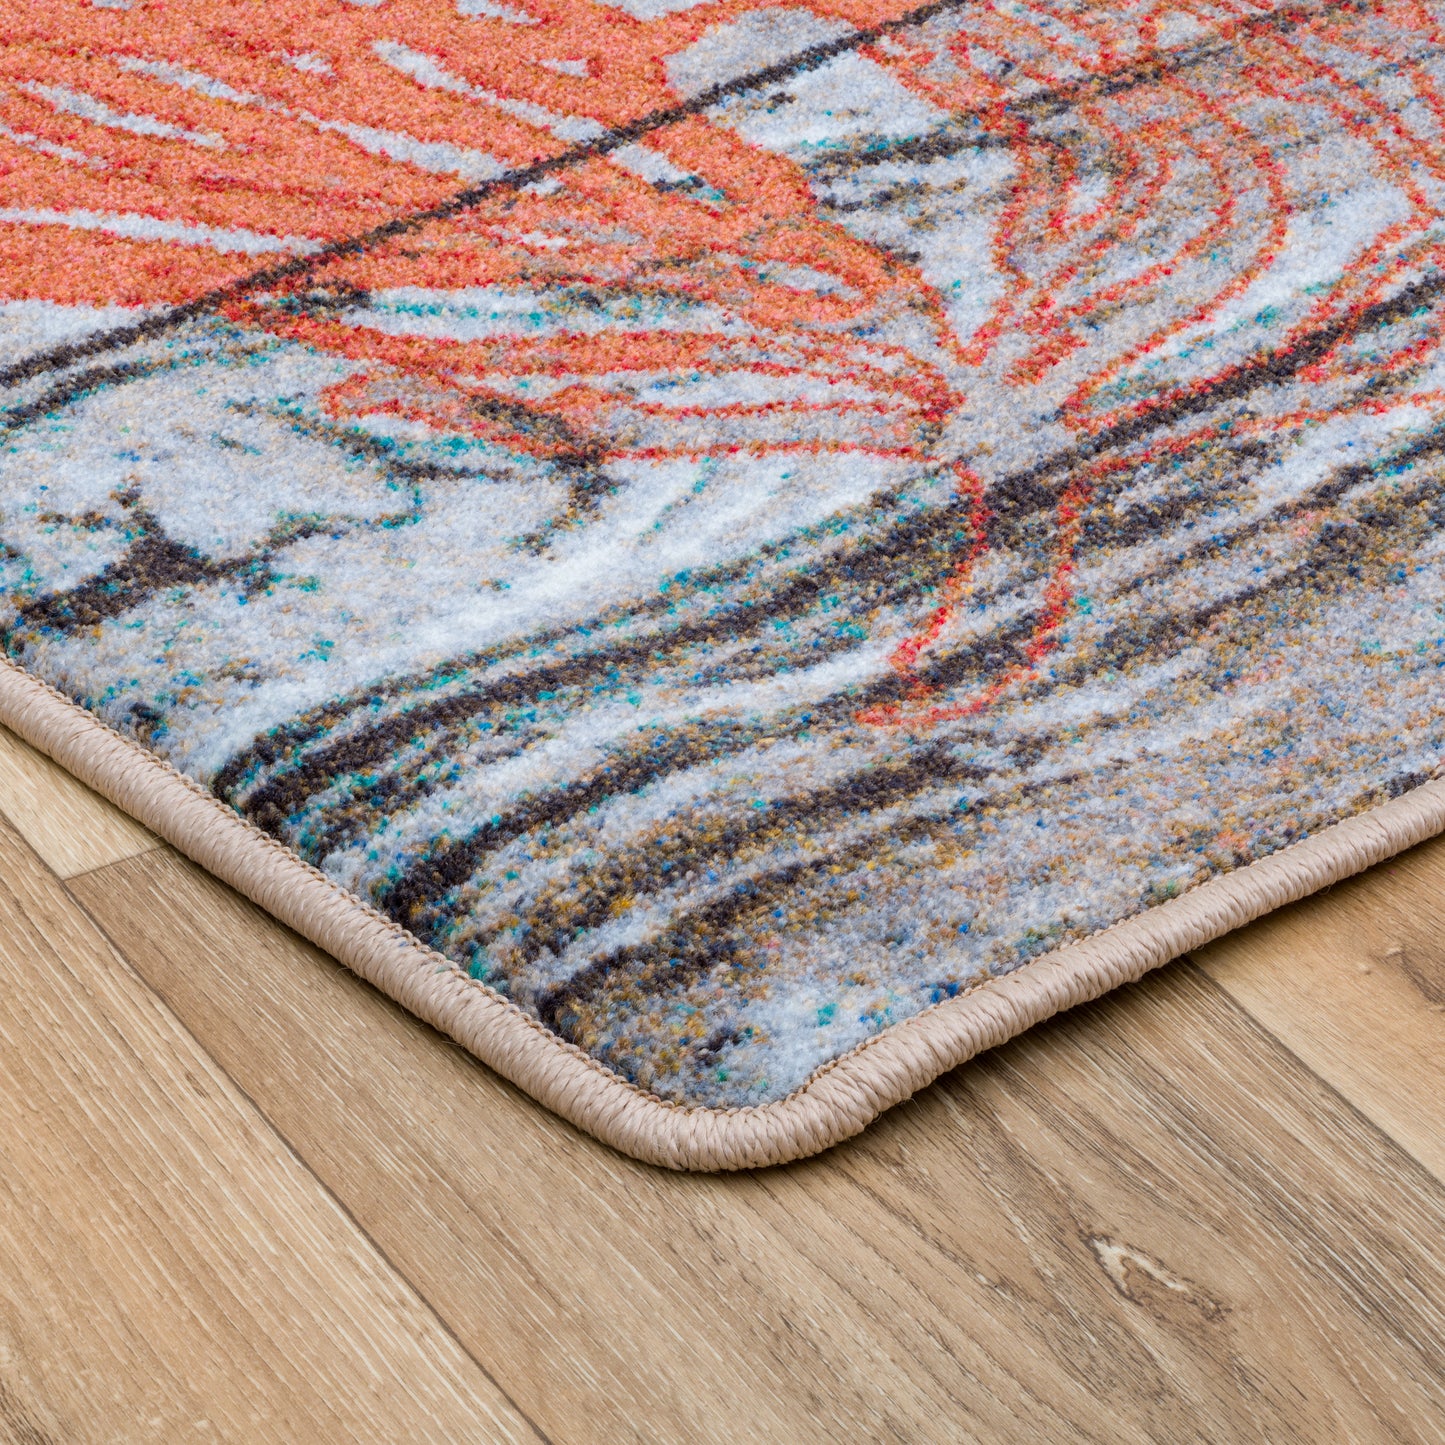 Versatile and durable rug perfect for living rooms, bedrooms, or beach house retreats, infusing coastal charm into any space.